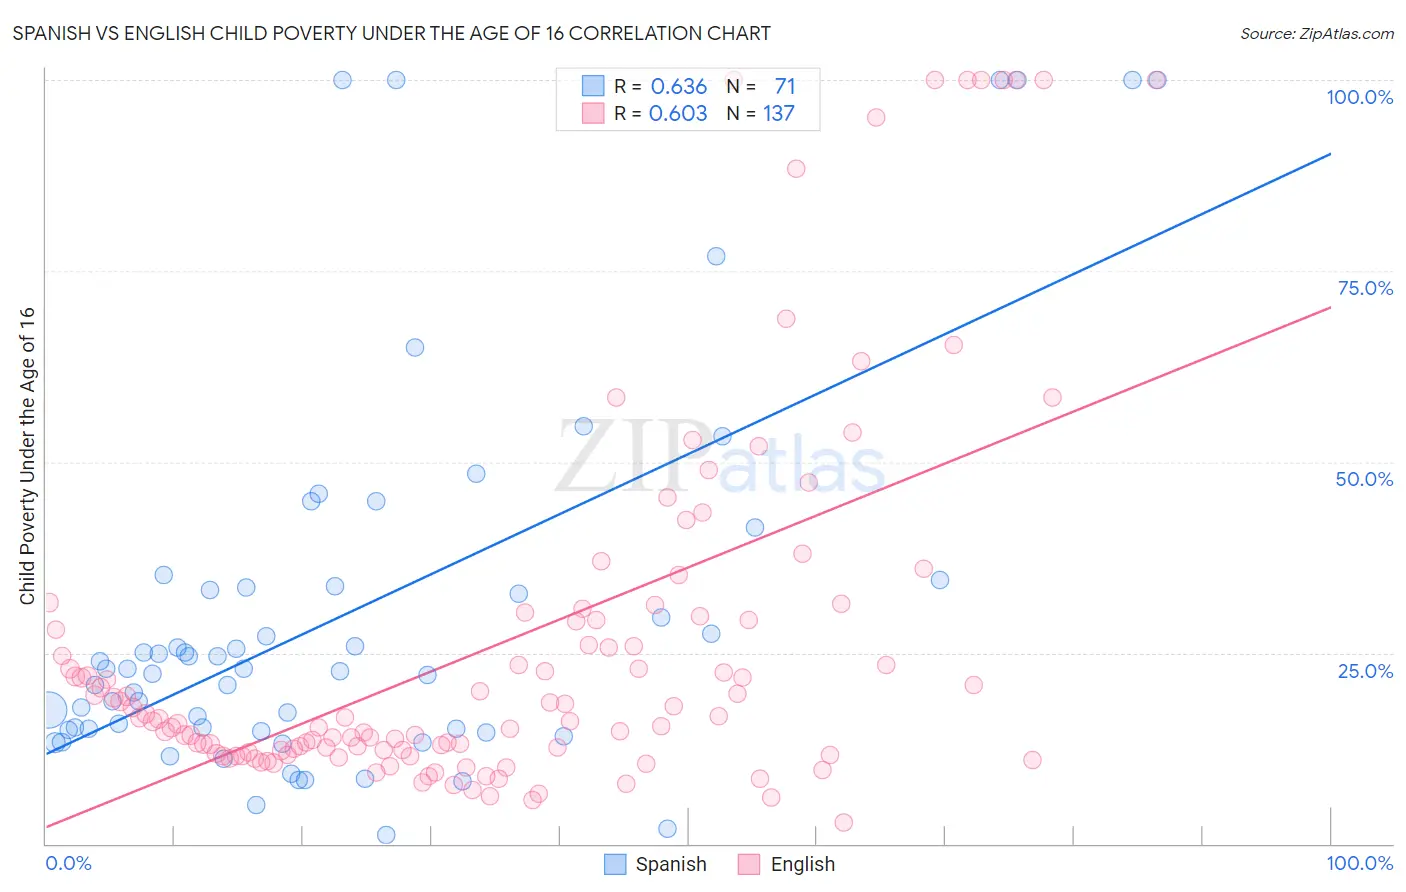 Spanish vs English Child Poverty Under the Age of 16